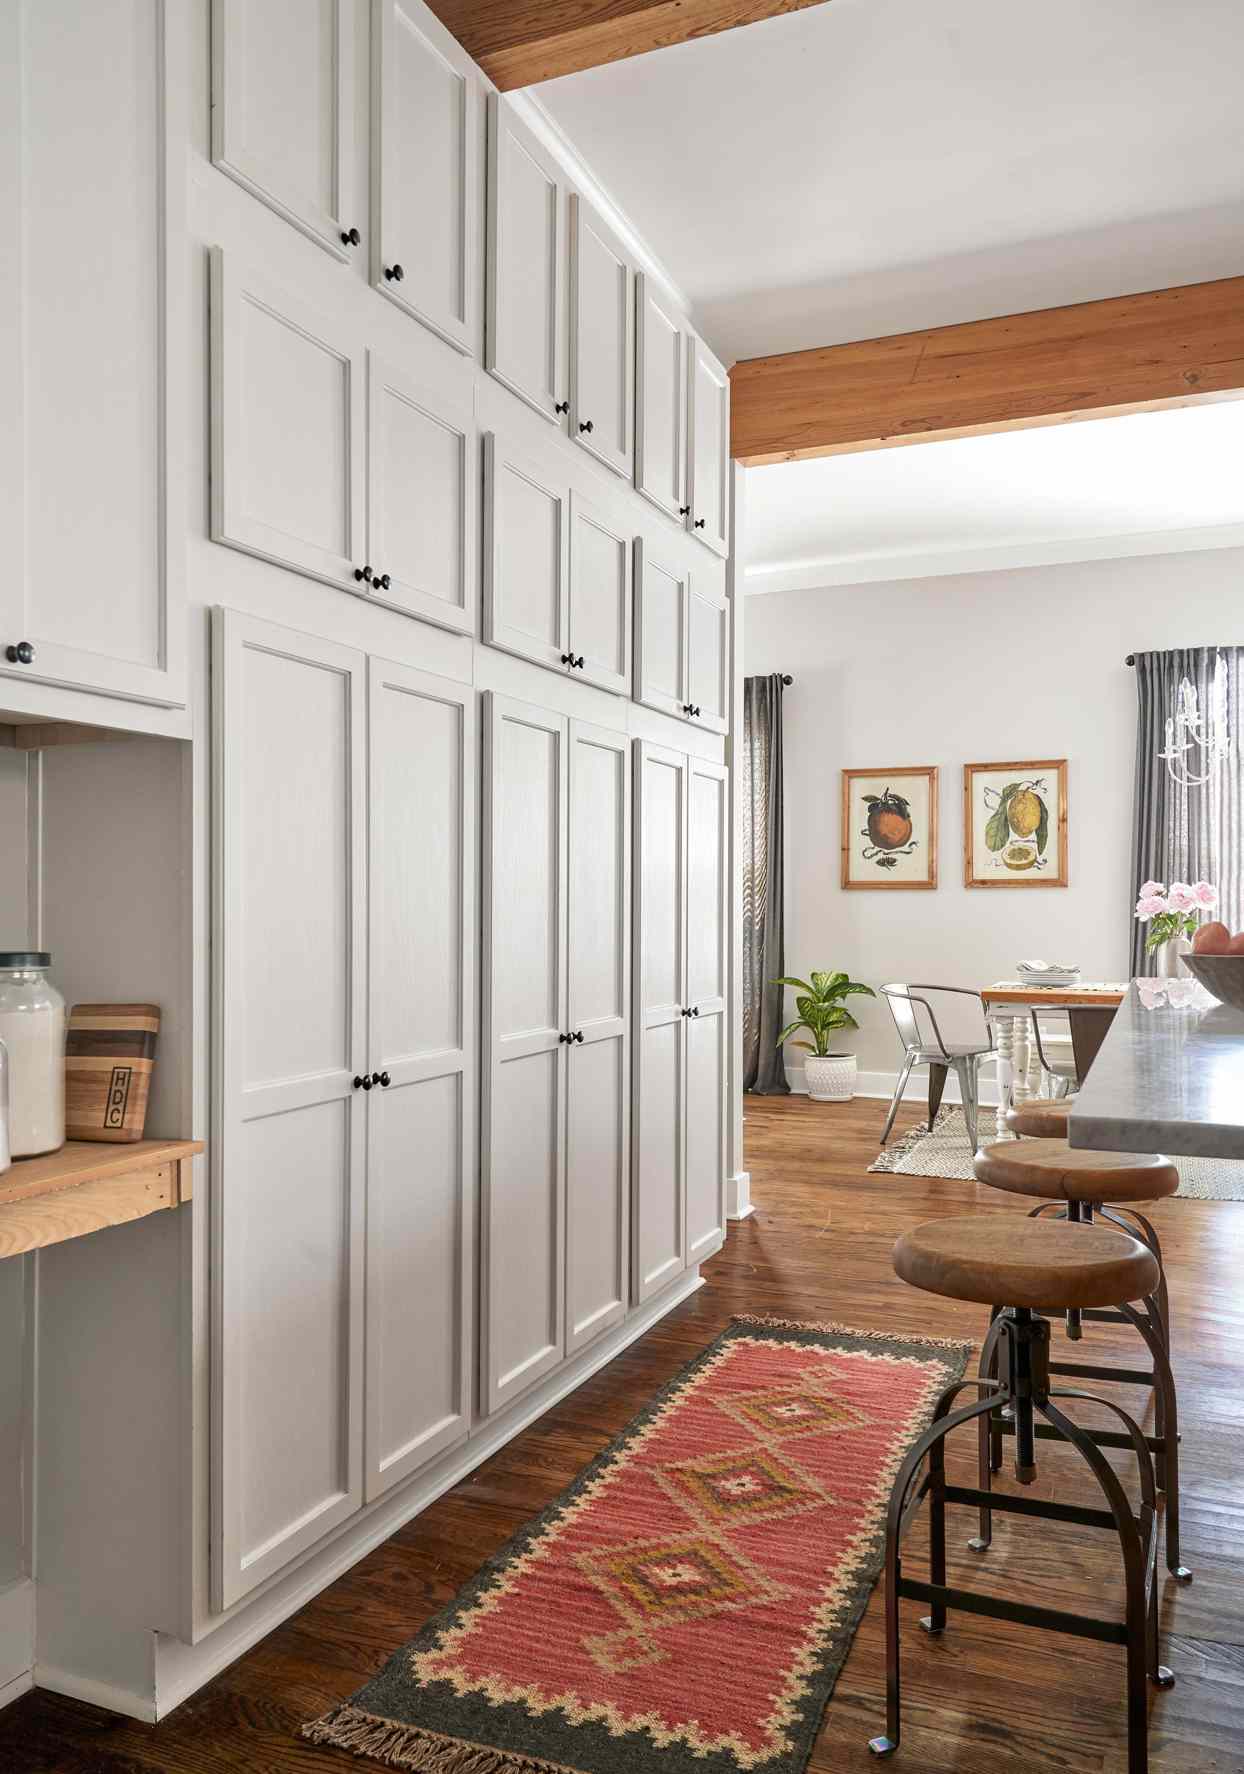 tall row of 12-inch-deep kitchen cabinetry